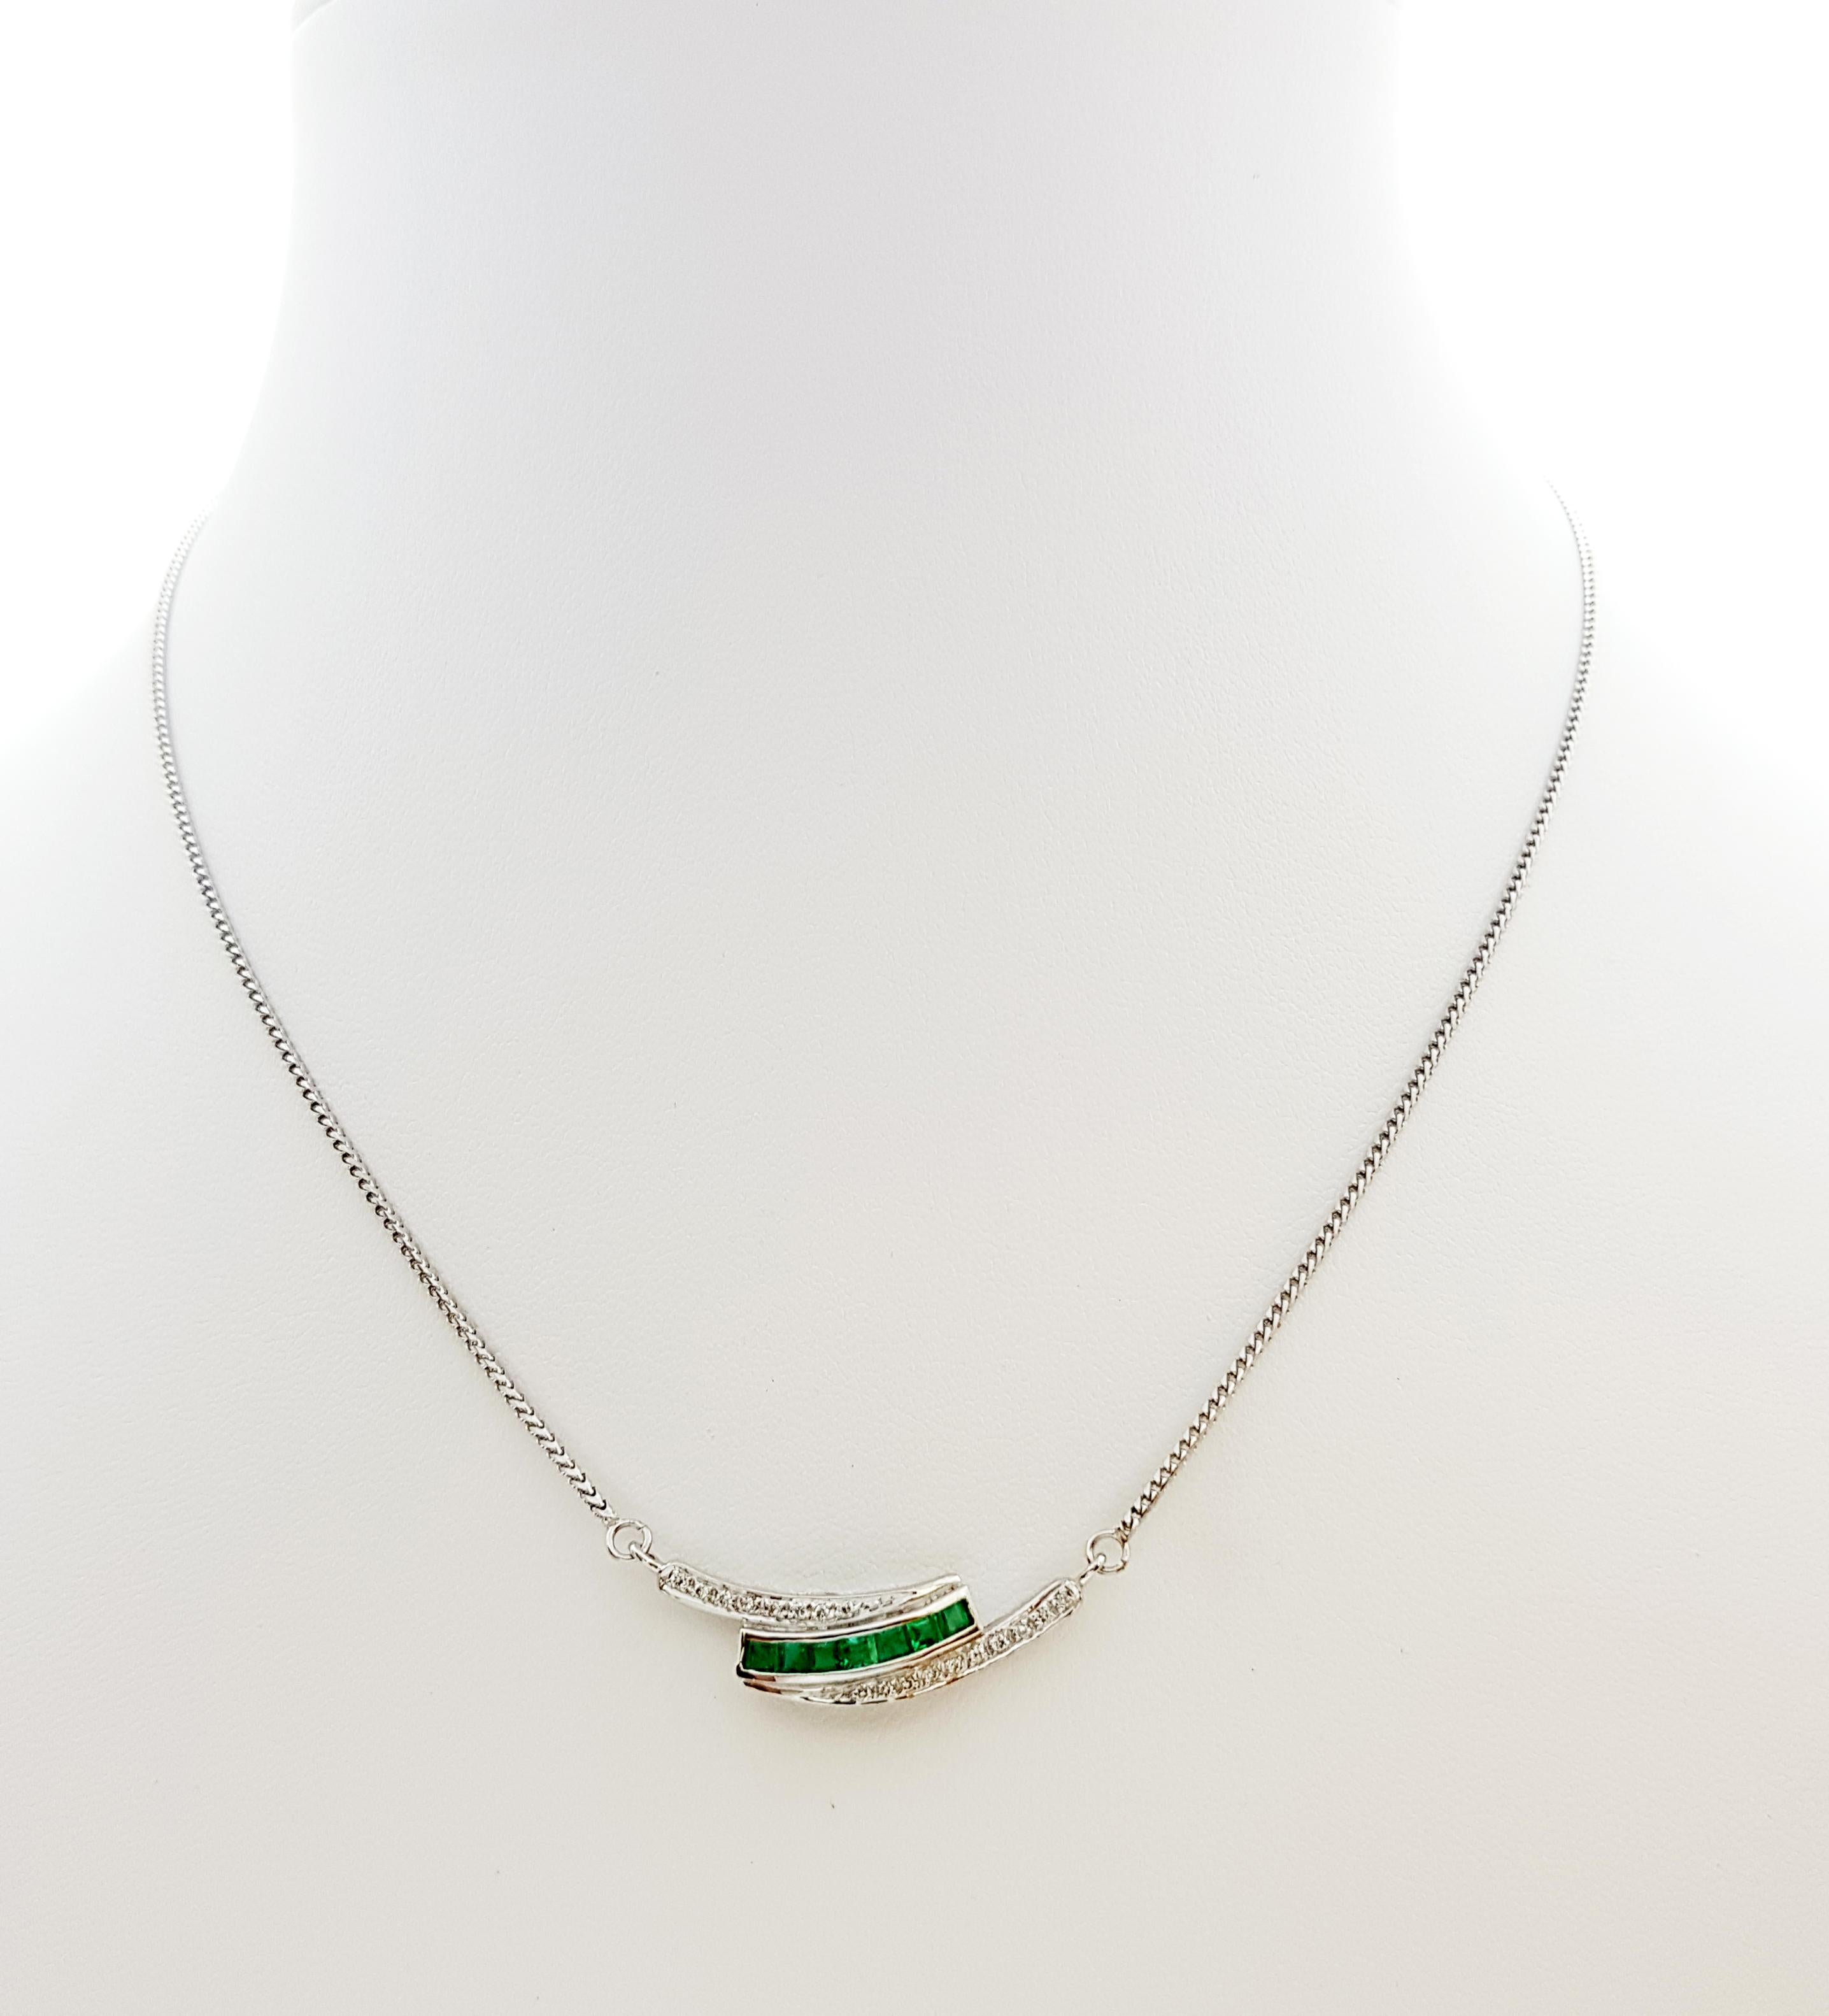 Emerald 0.45 carat with Diamond 0.10 carat Necklace set in 18 Karat White Gold Settings

Width: 0.7 cm 
Length: 45.0 cm
Total Weight: 7.84 grams

